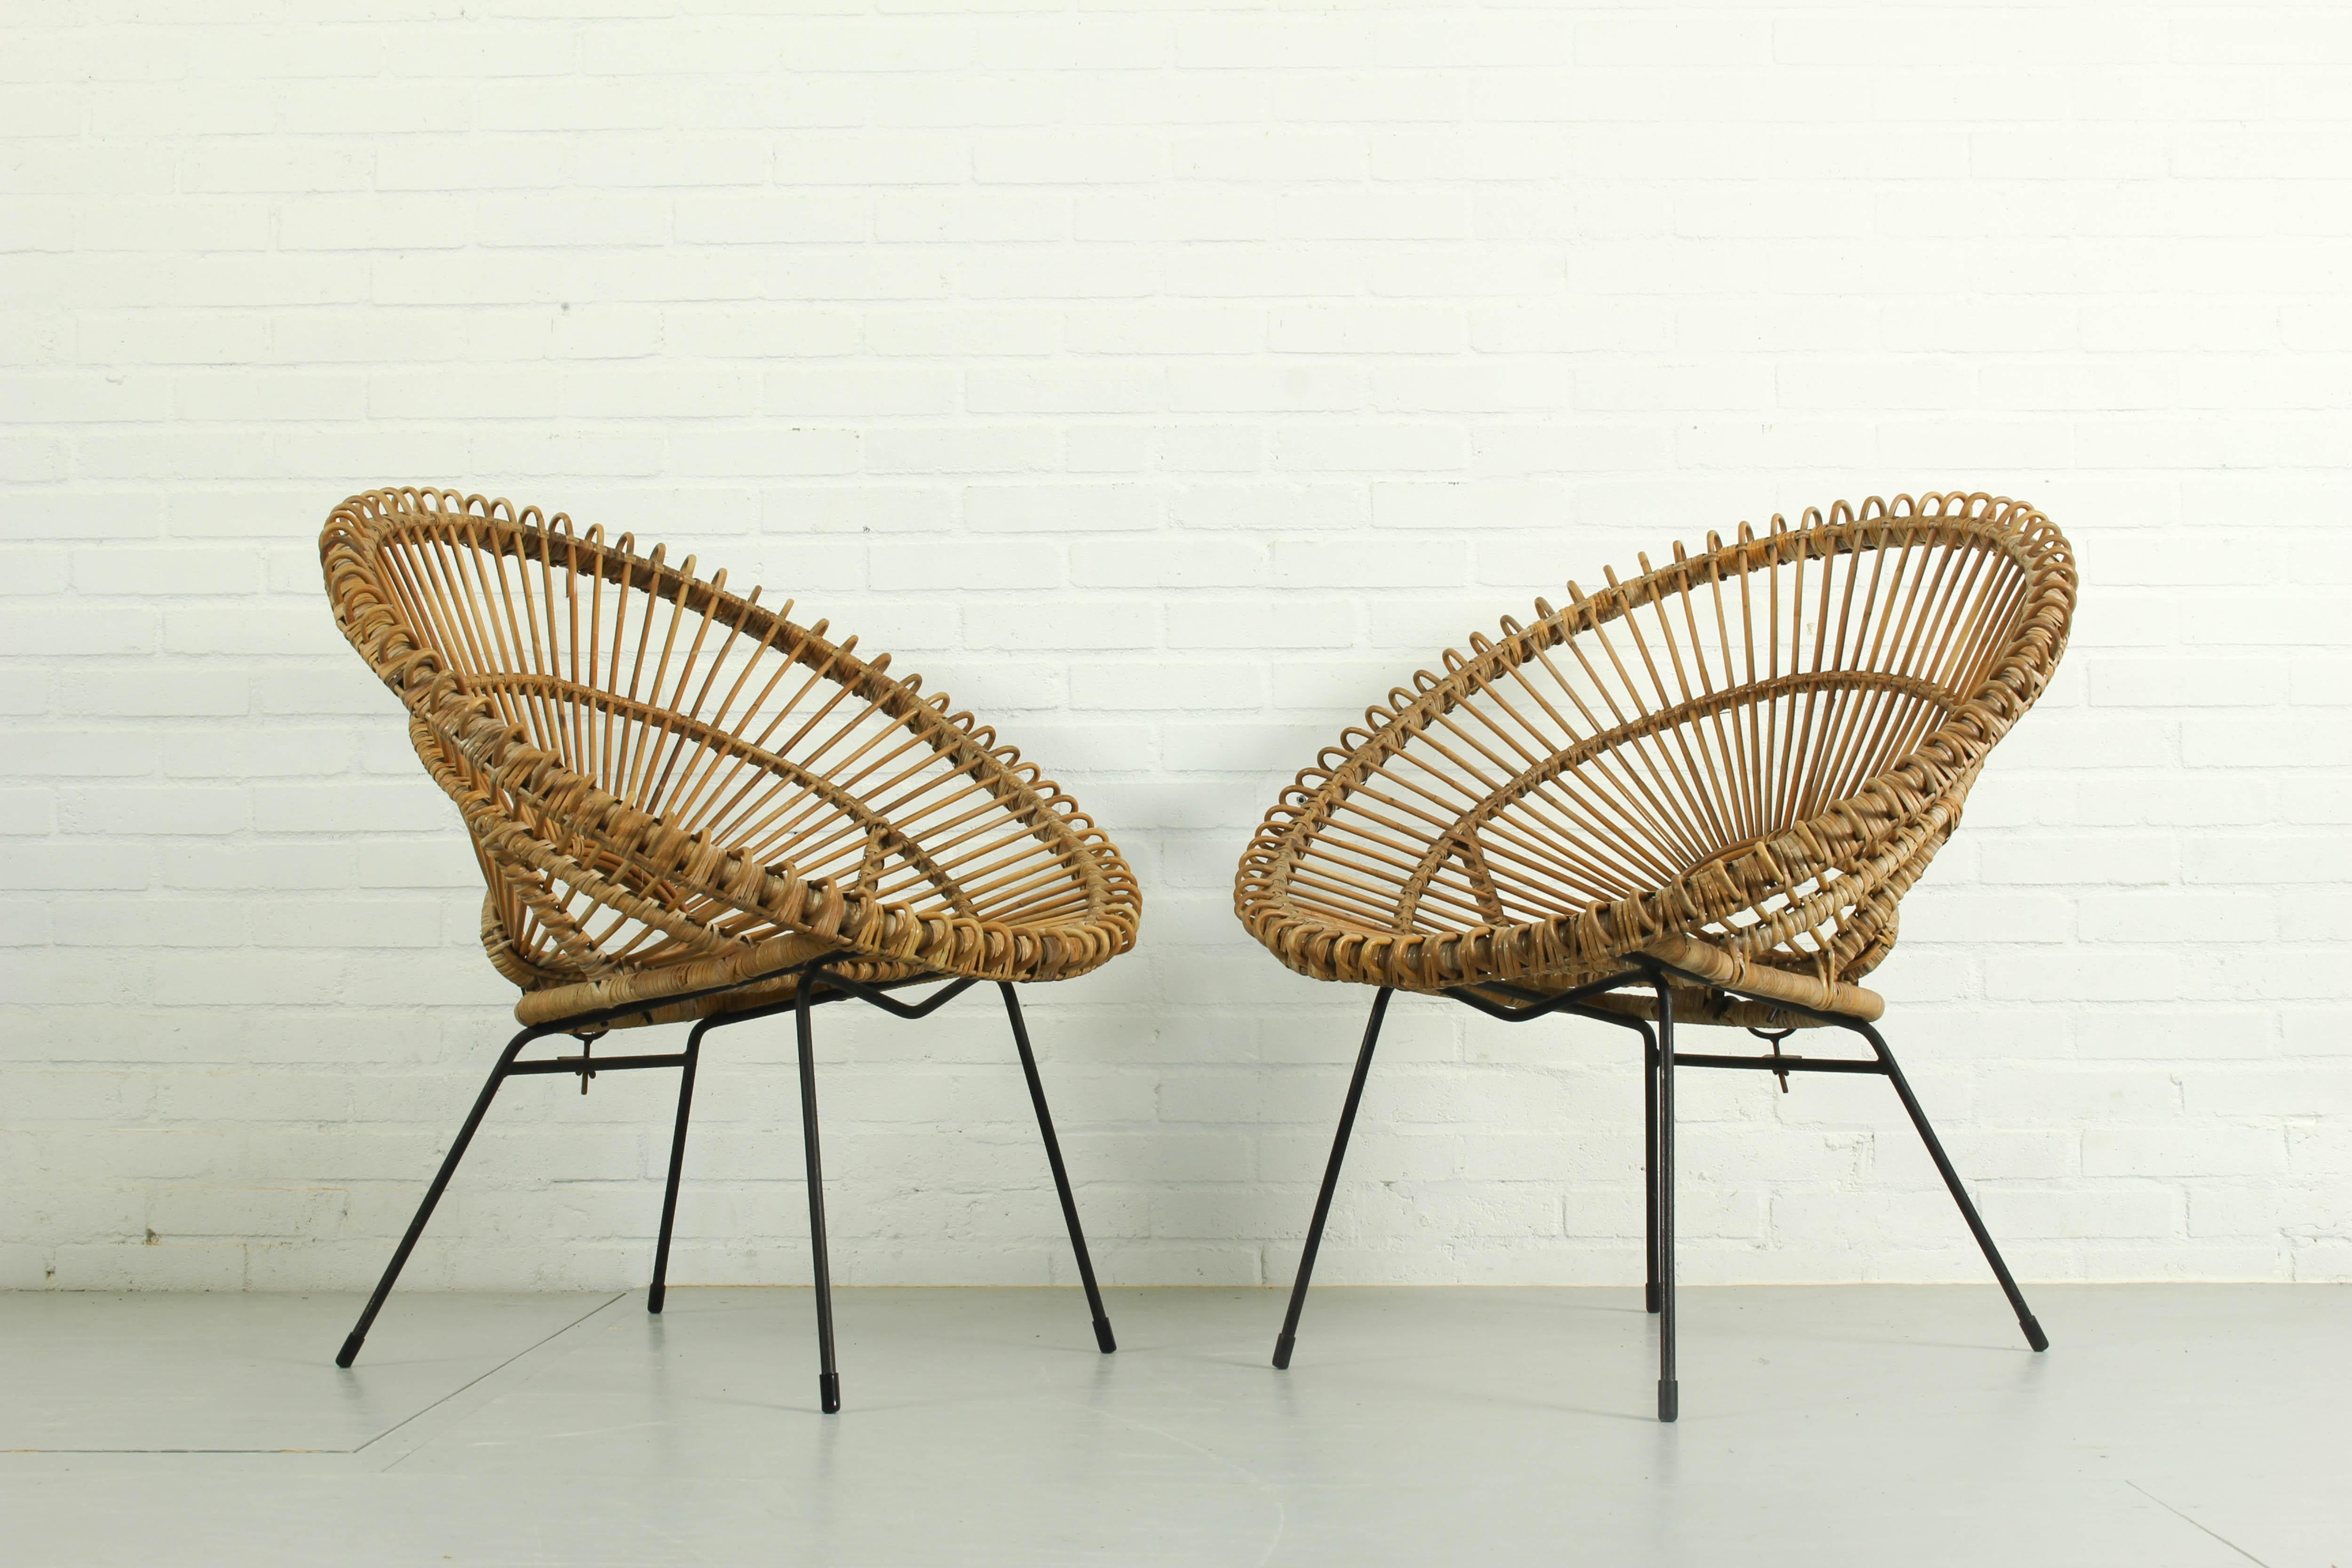 Set of 2 sunburst chairs by Rohe Noordwolde, 1950s. Very rare find. Manufactured by Rohe Noordwolde from the Netherlands. Both chairs are in great condition considering their age. 

Dimensions: 81cm h, 79cm w, 72cm d. 
